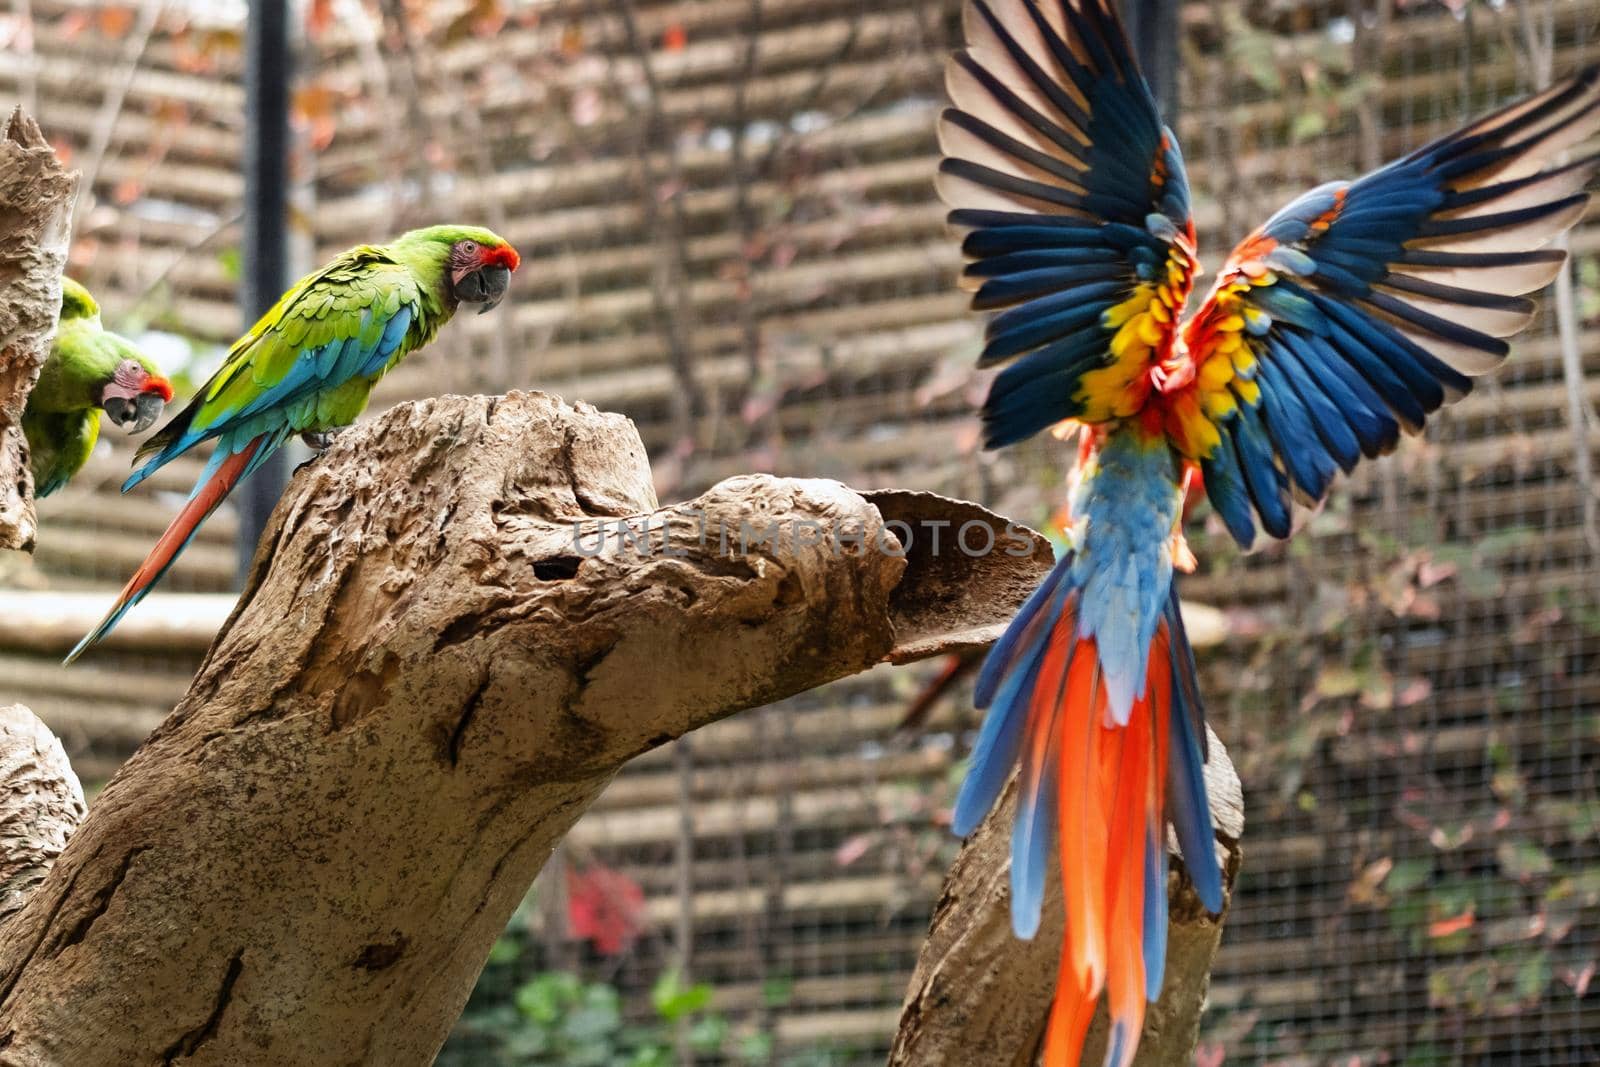 Colorful parrots in a park on the island of Tenerife by Lobachad